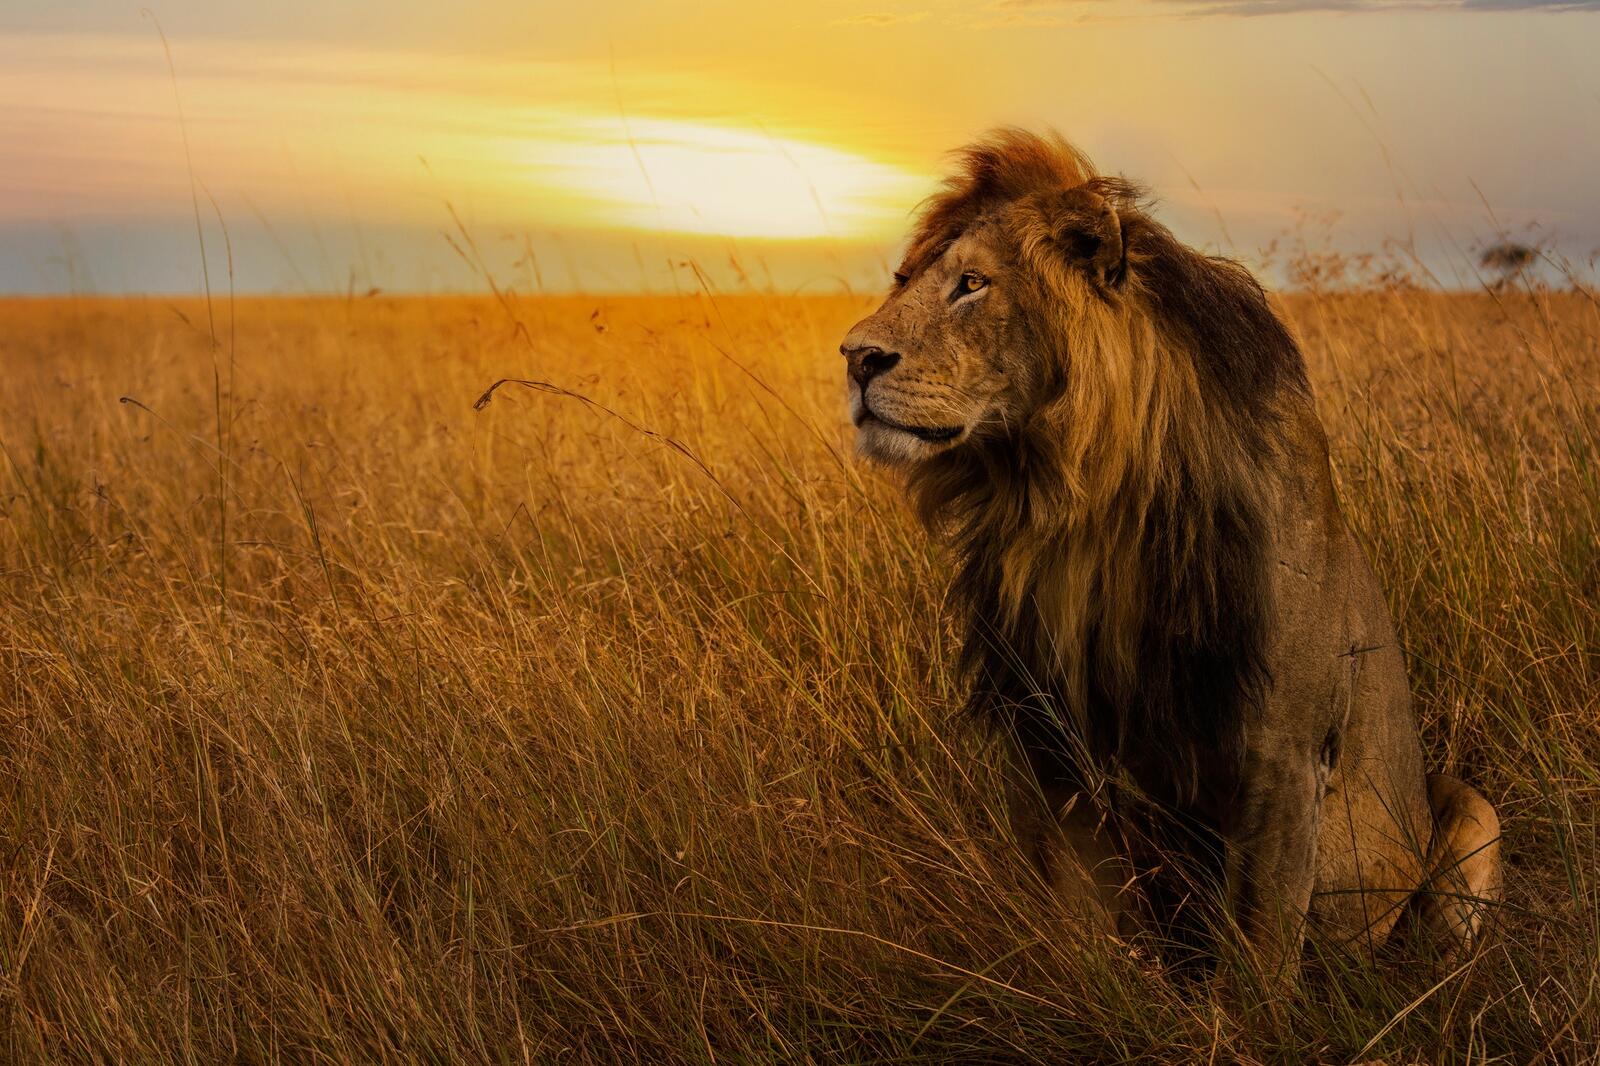 Wallpapers lion Africa stately on the desktop